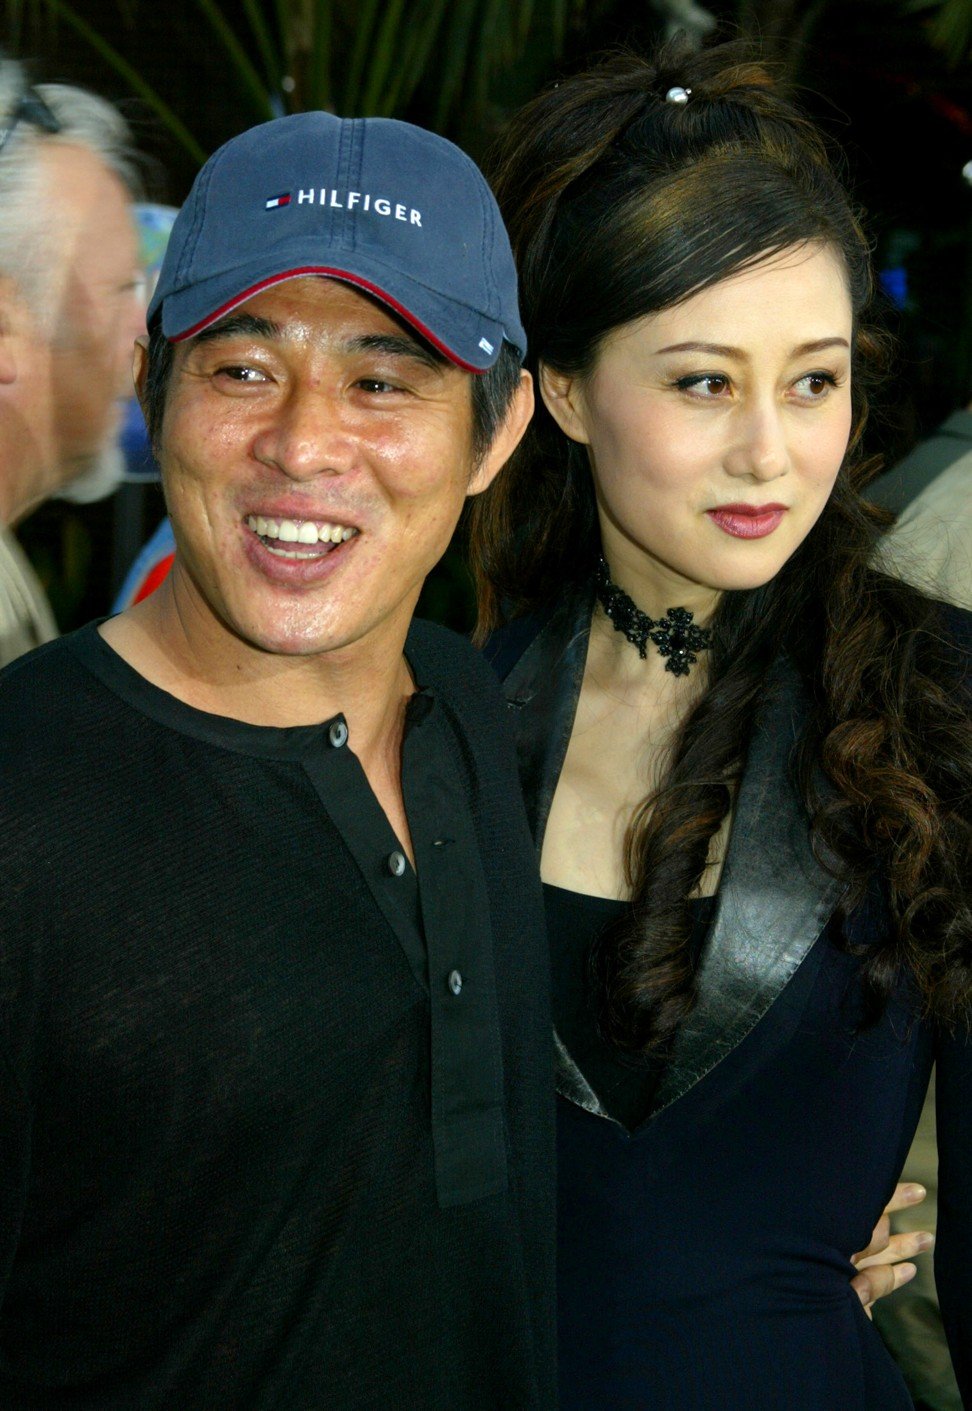 Jet Li and his wife Nina Li Chi arrive for the premiere of ‘Hulk’ in Los Angeles in June 2003. Photo: Reuters